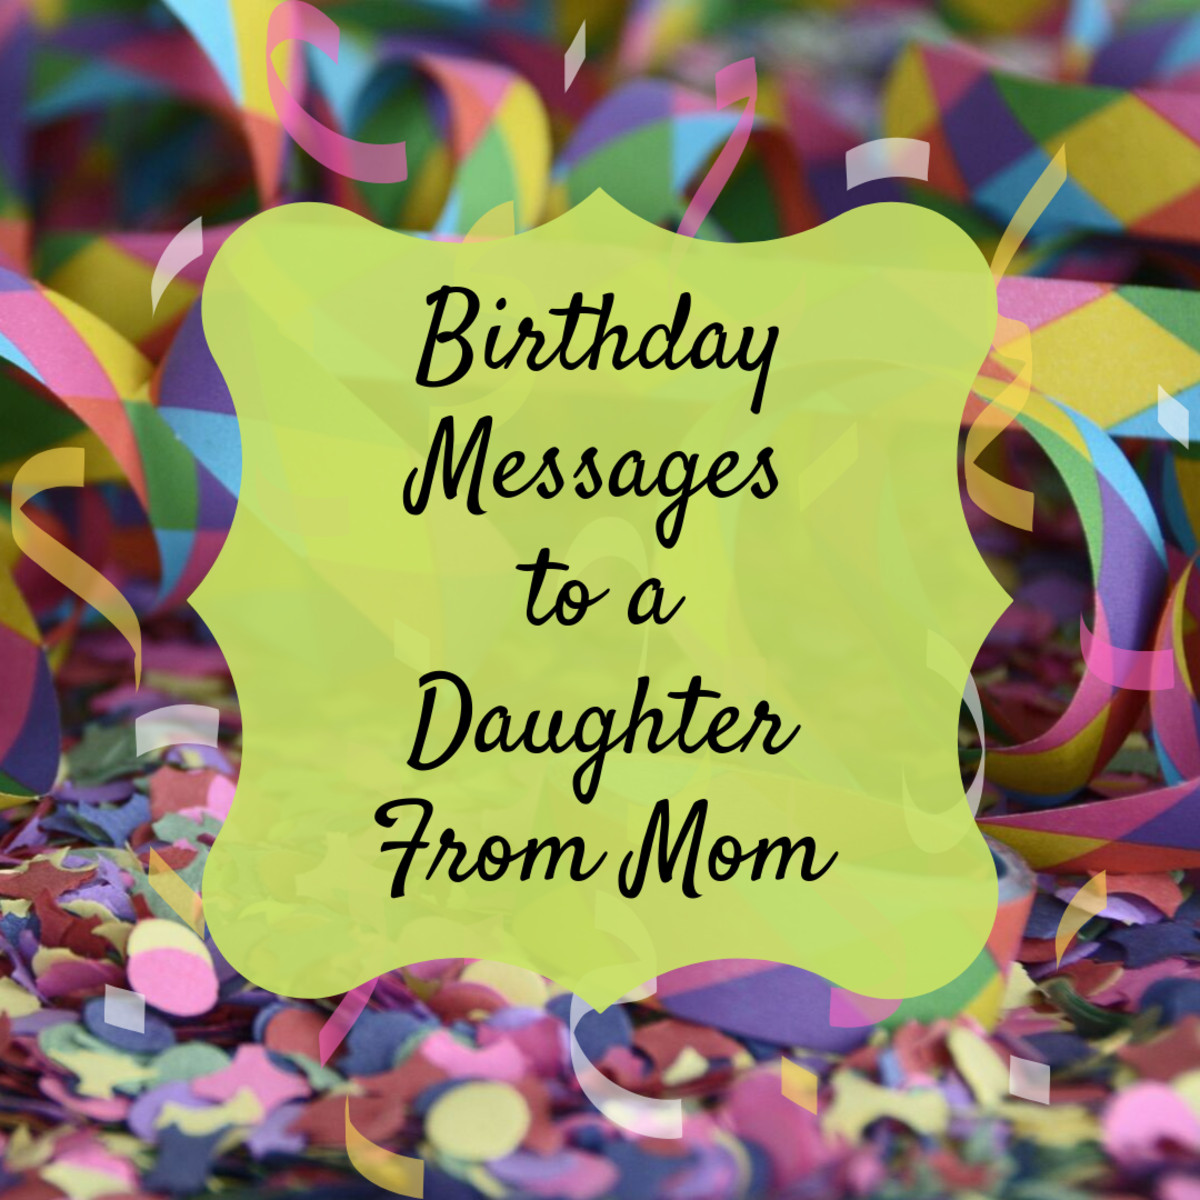 Birthday Wishes From Mom To Daughter
 Birthday Wishes Texts and Quotes for a Daughter From Mom